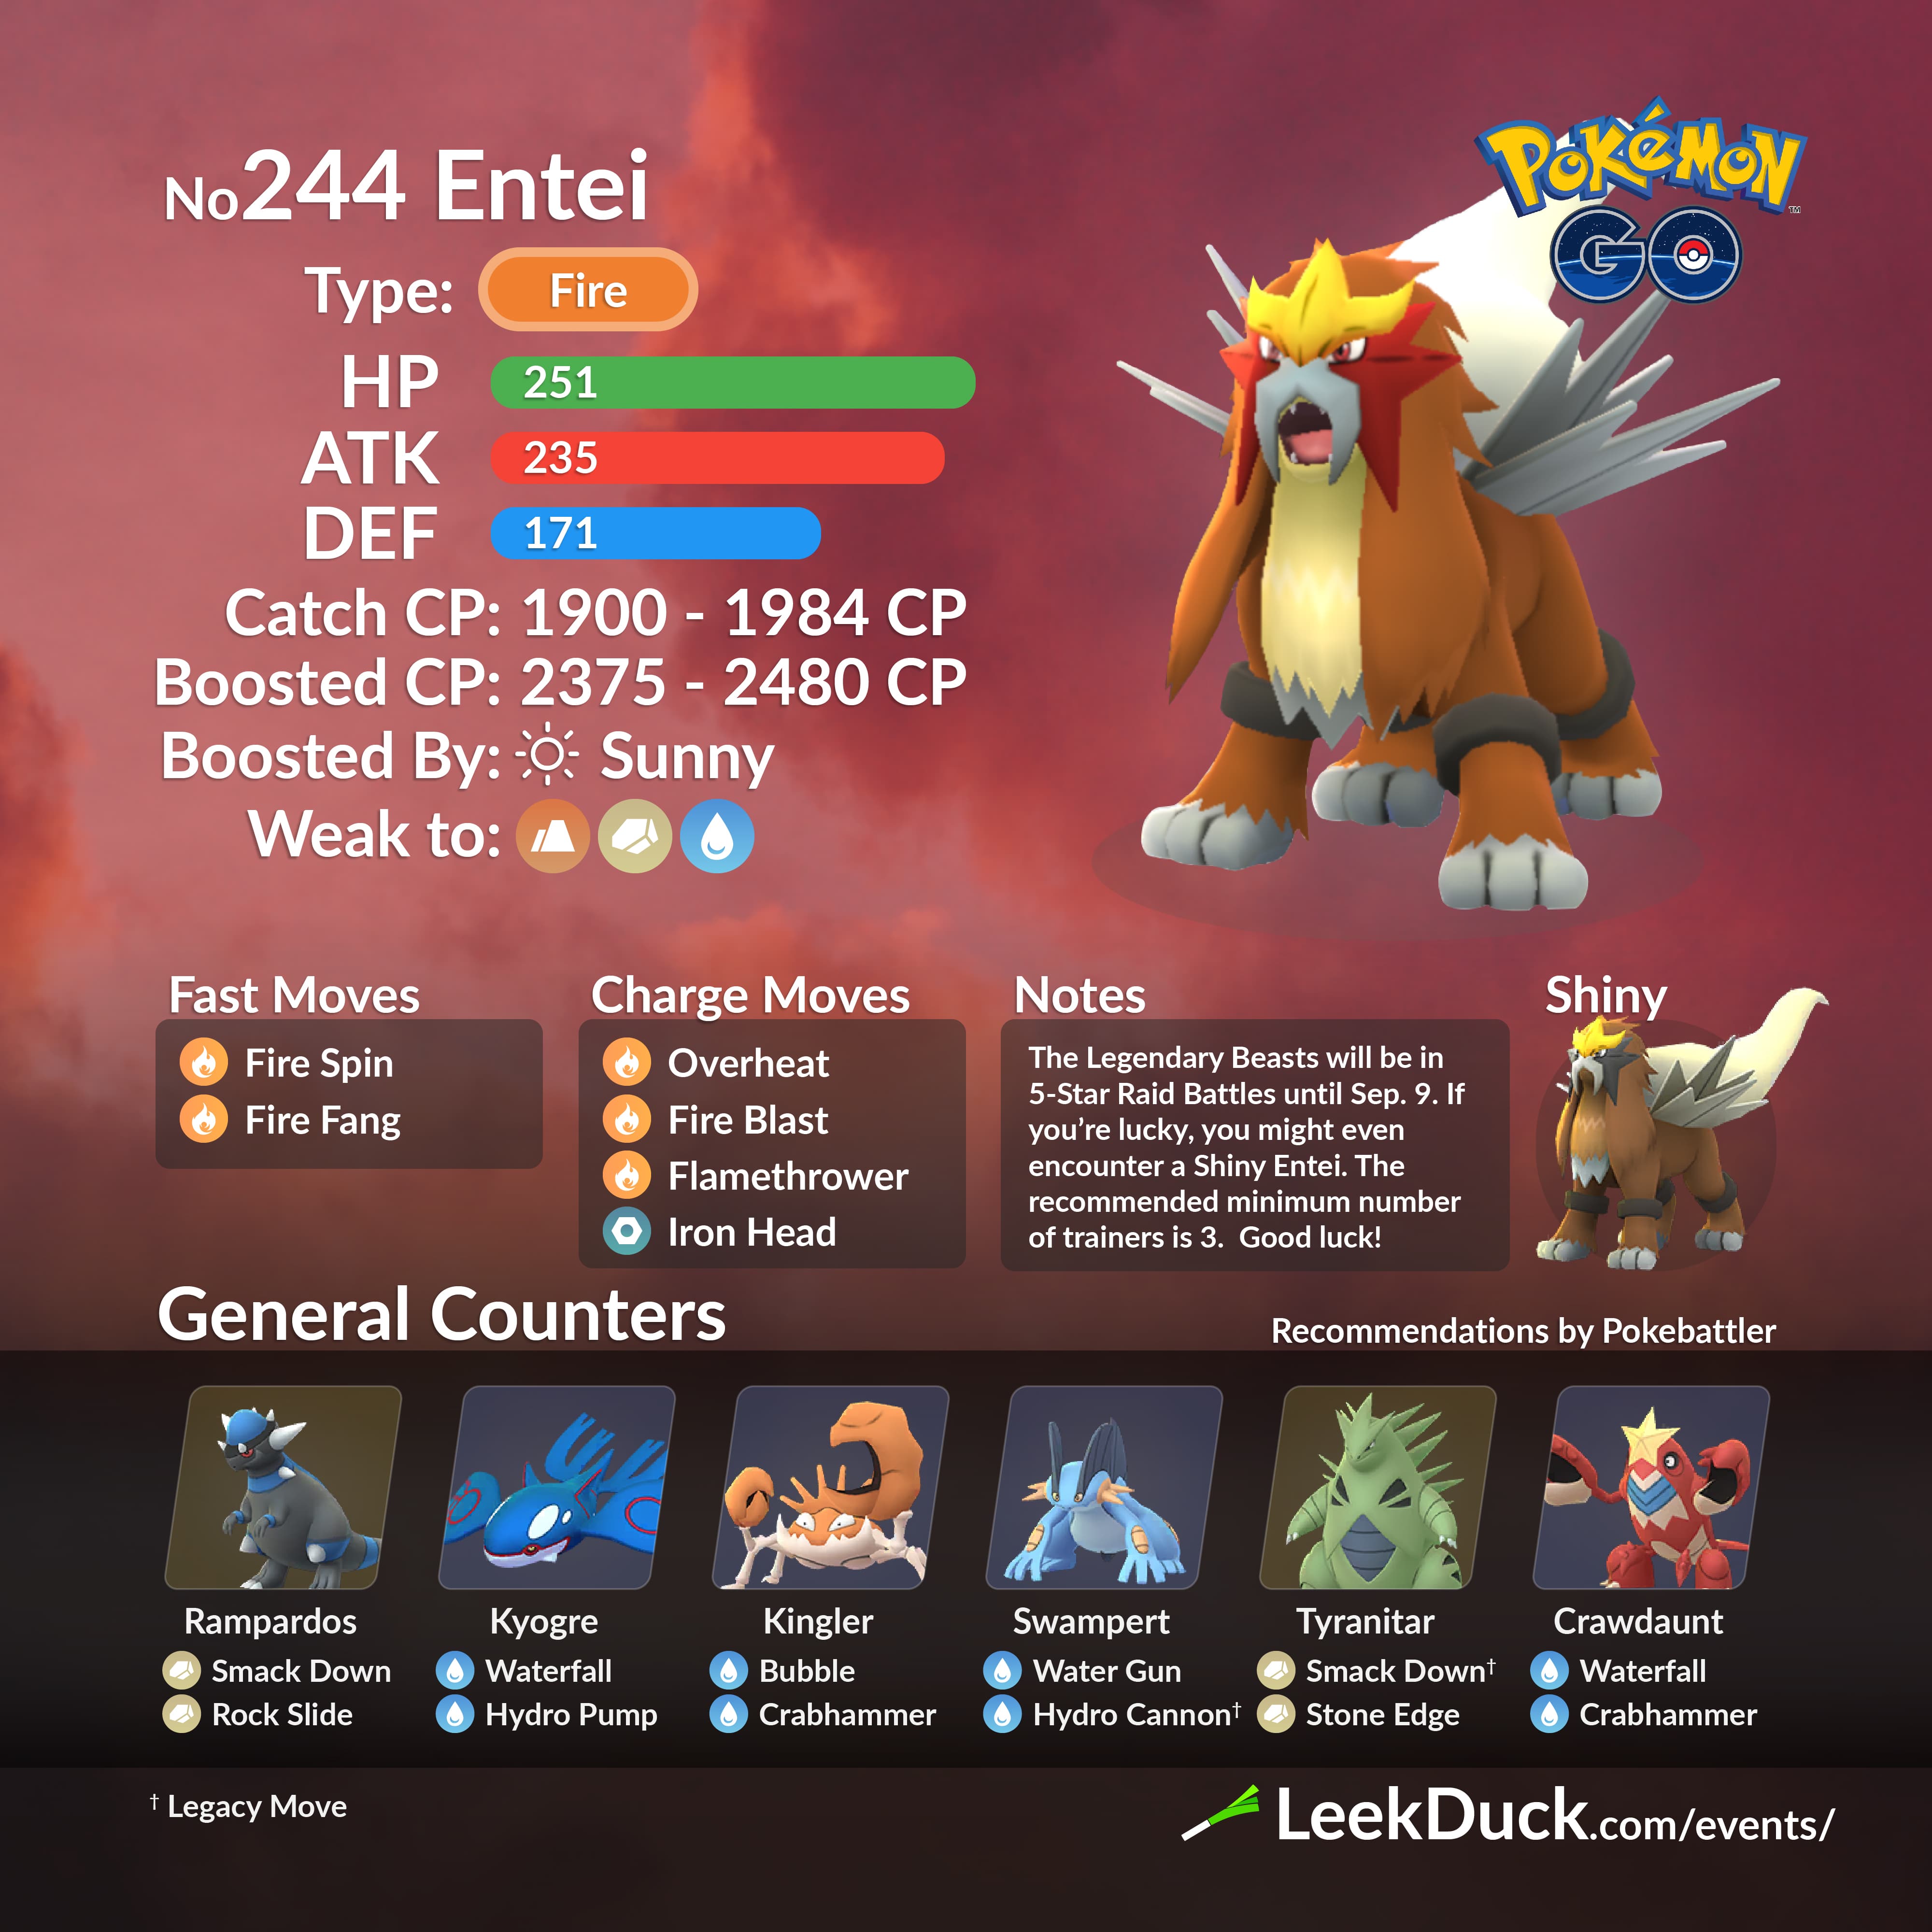 Leek Duck - The Ultra Beast Nihilego makes its debut in